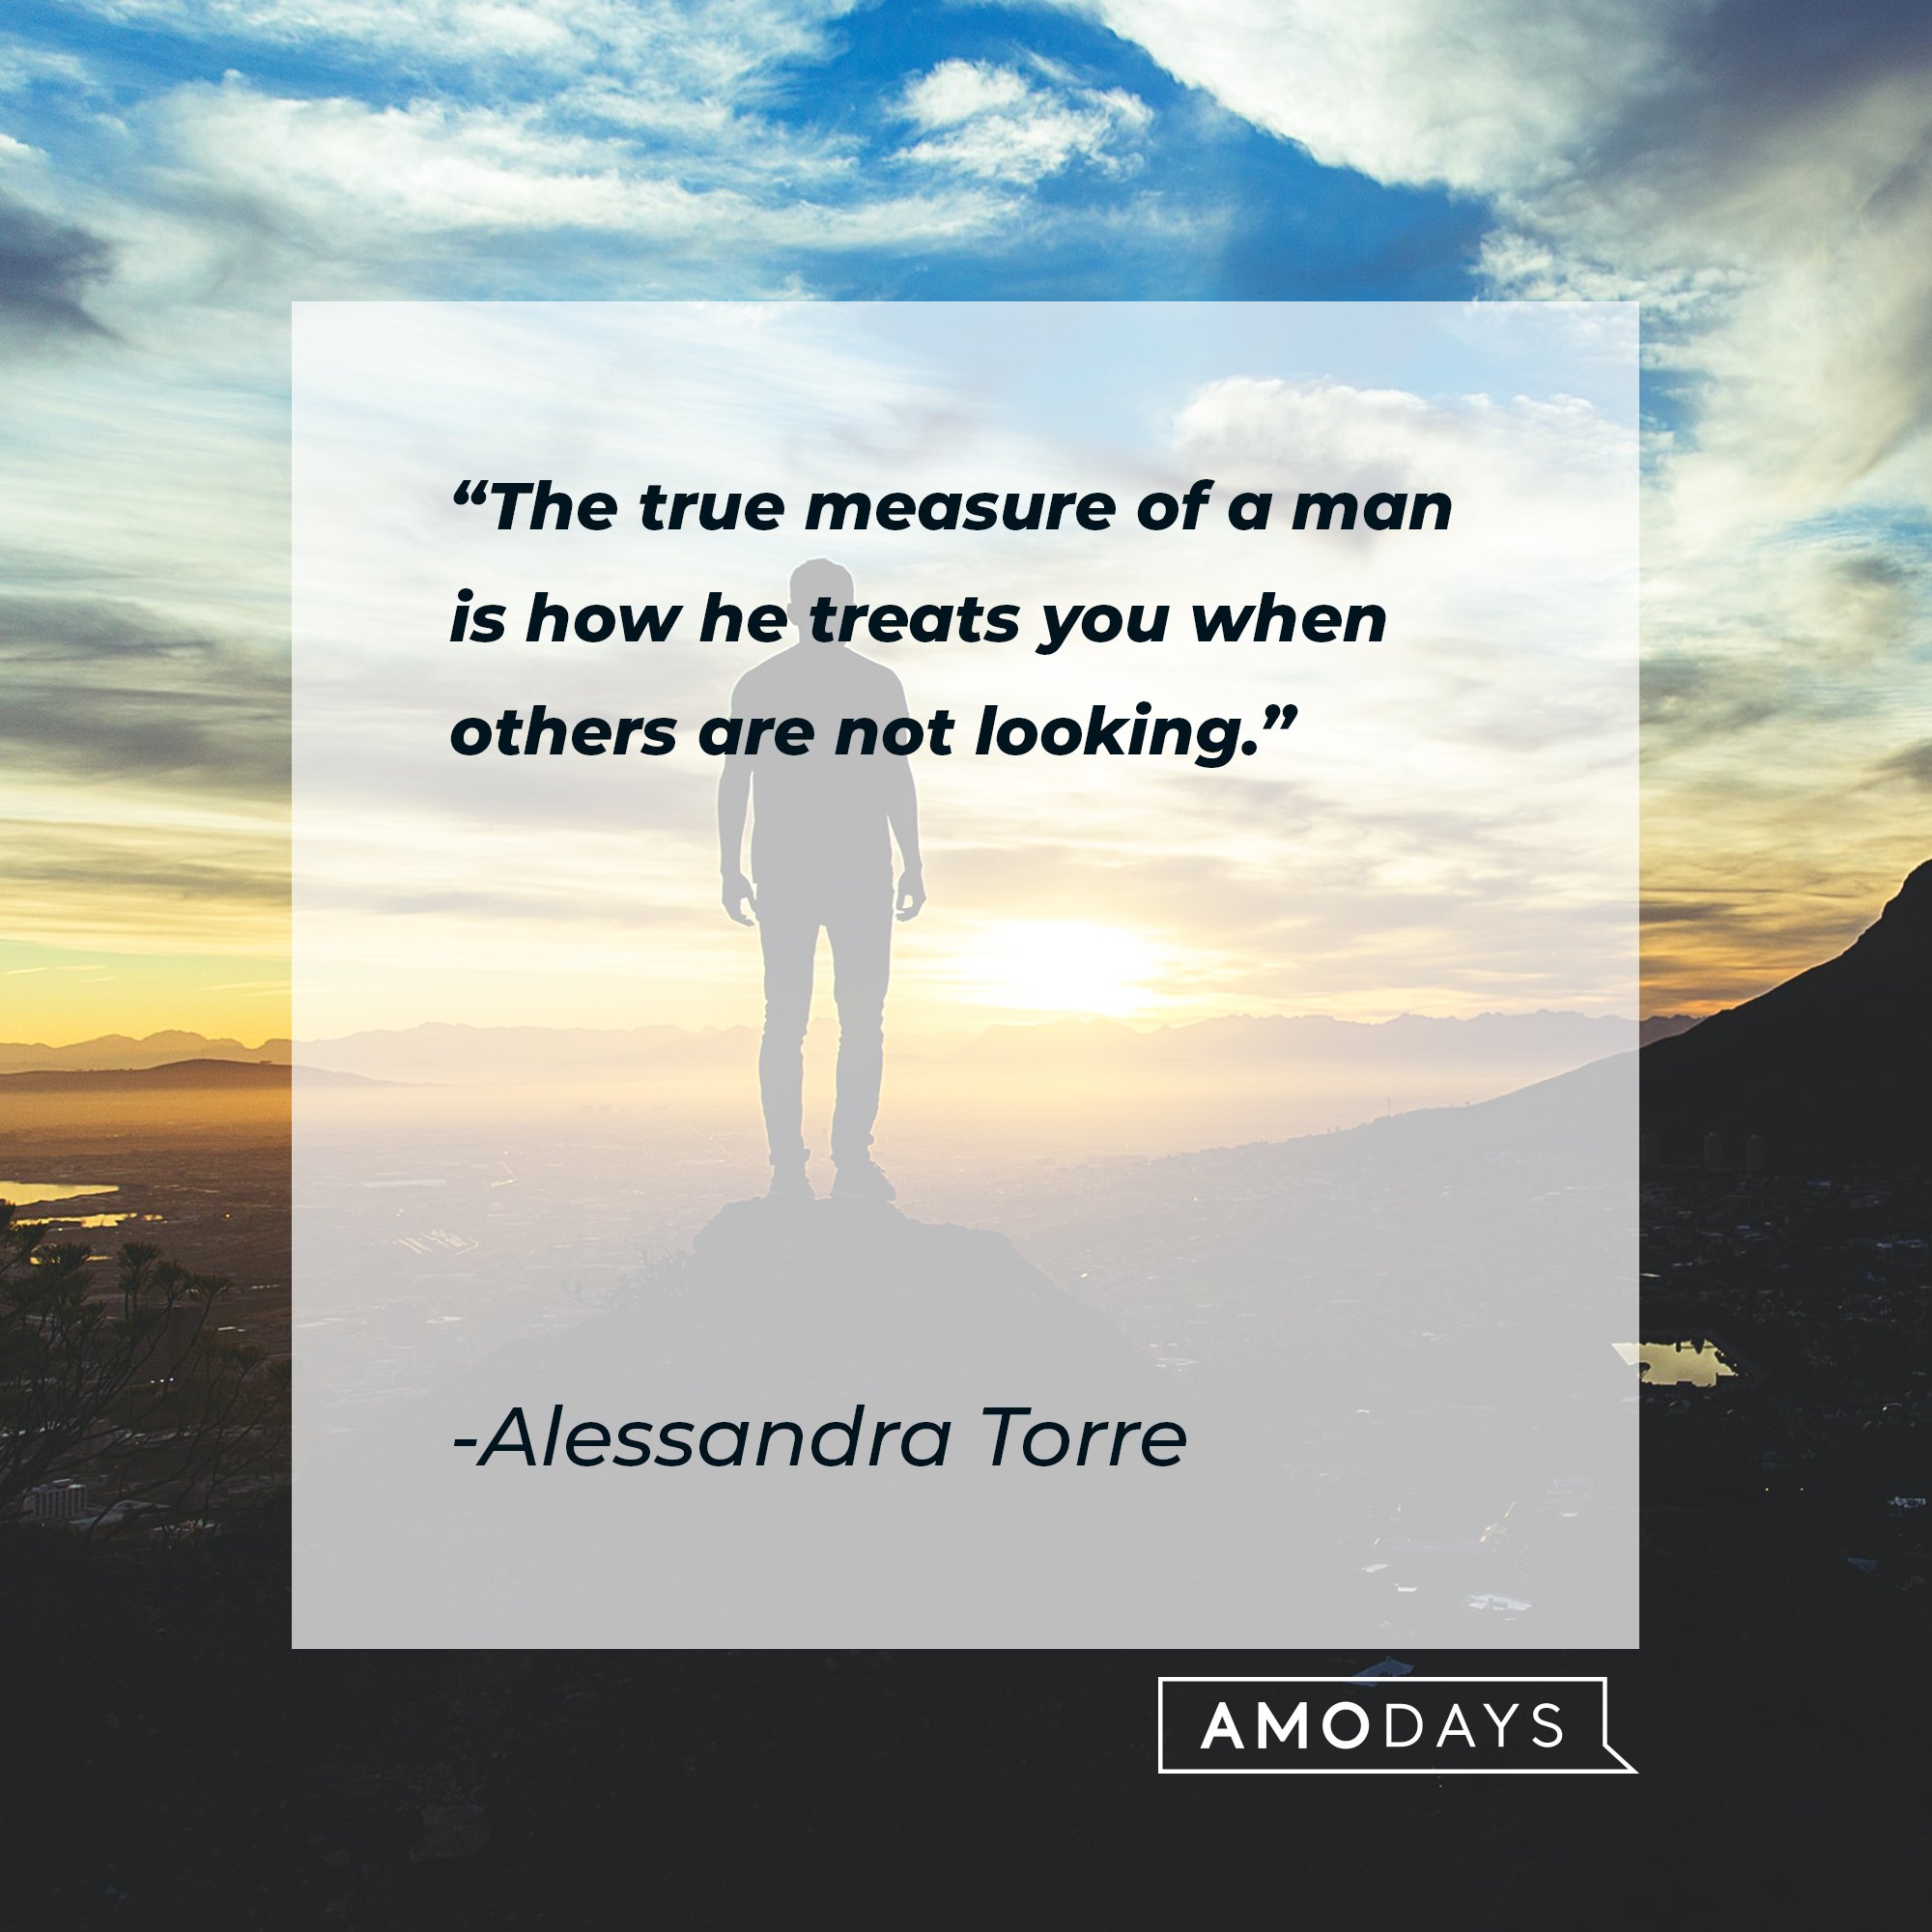 Alessandra Torre’s quote: "The true measure of a man is how he treats you when others are not looking." | Image: AmoDays